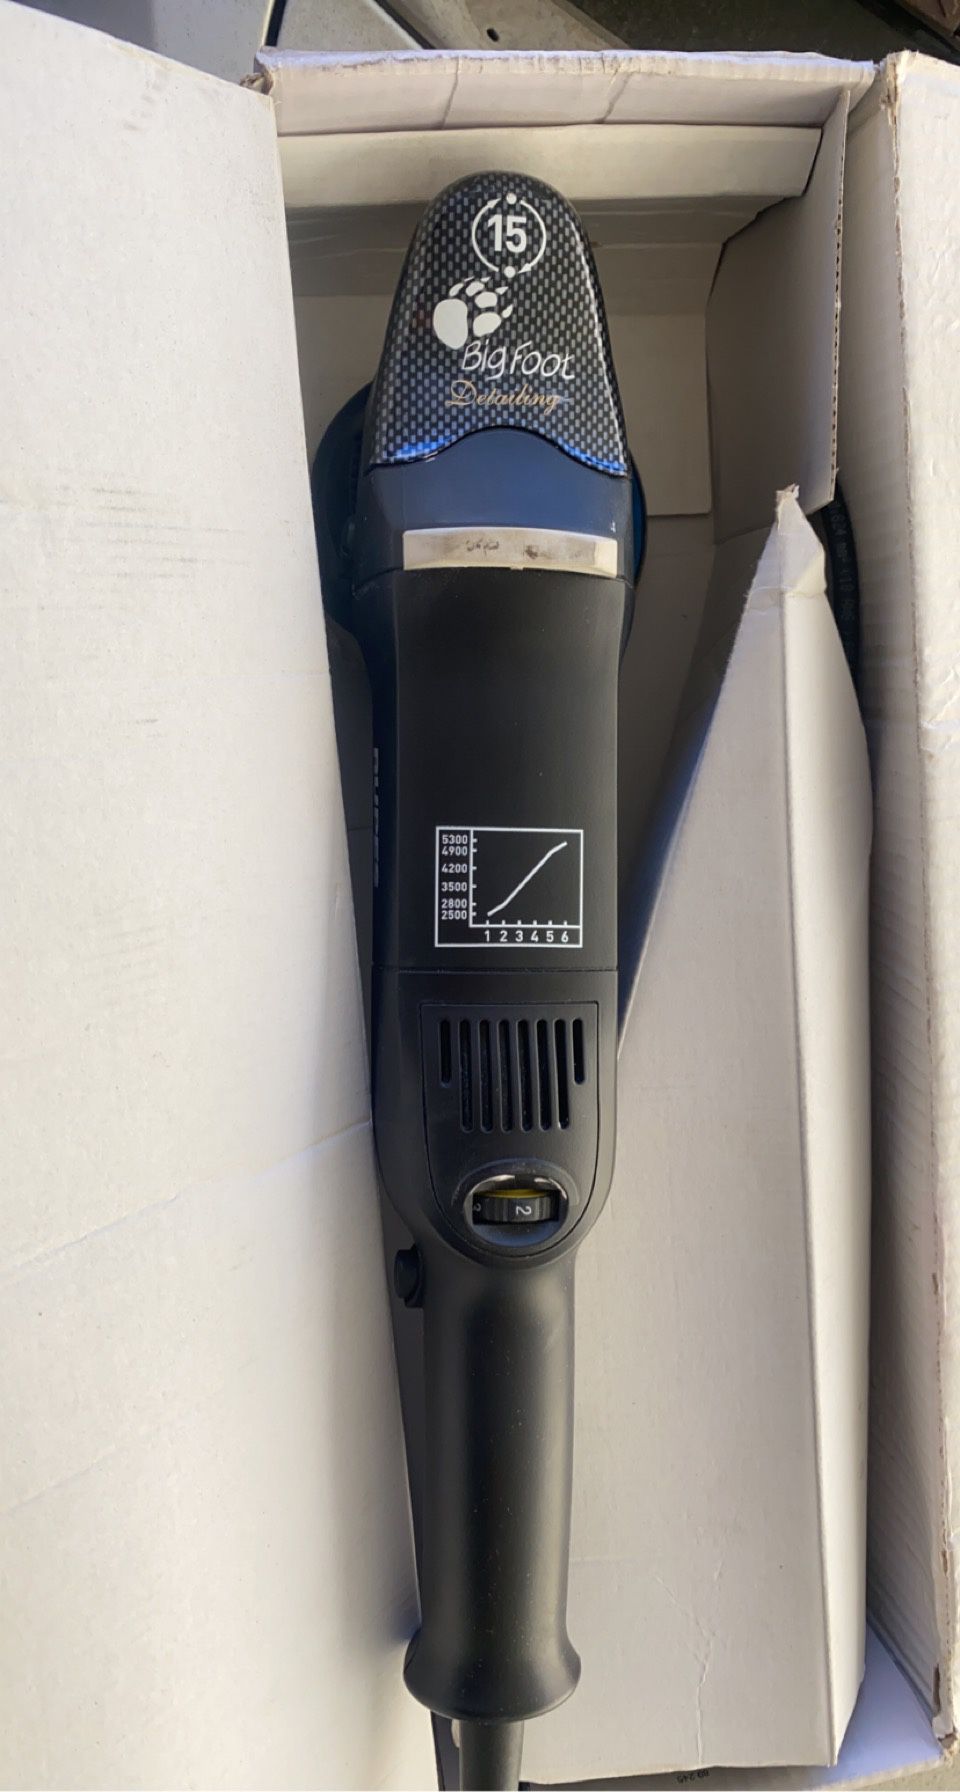 Car wash and detail 15 RUPES polisher for Sale in Los Angeles, CA - OfferUp